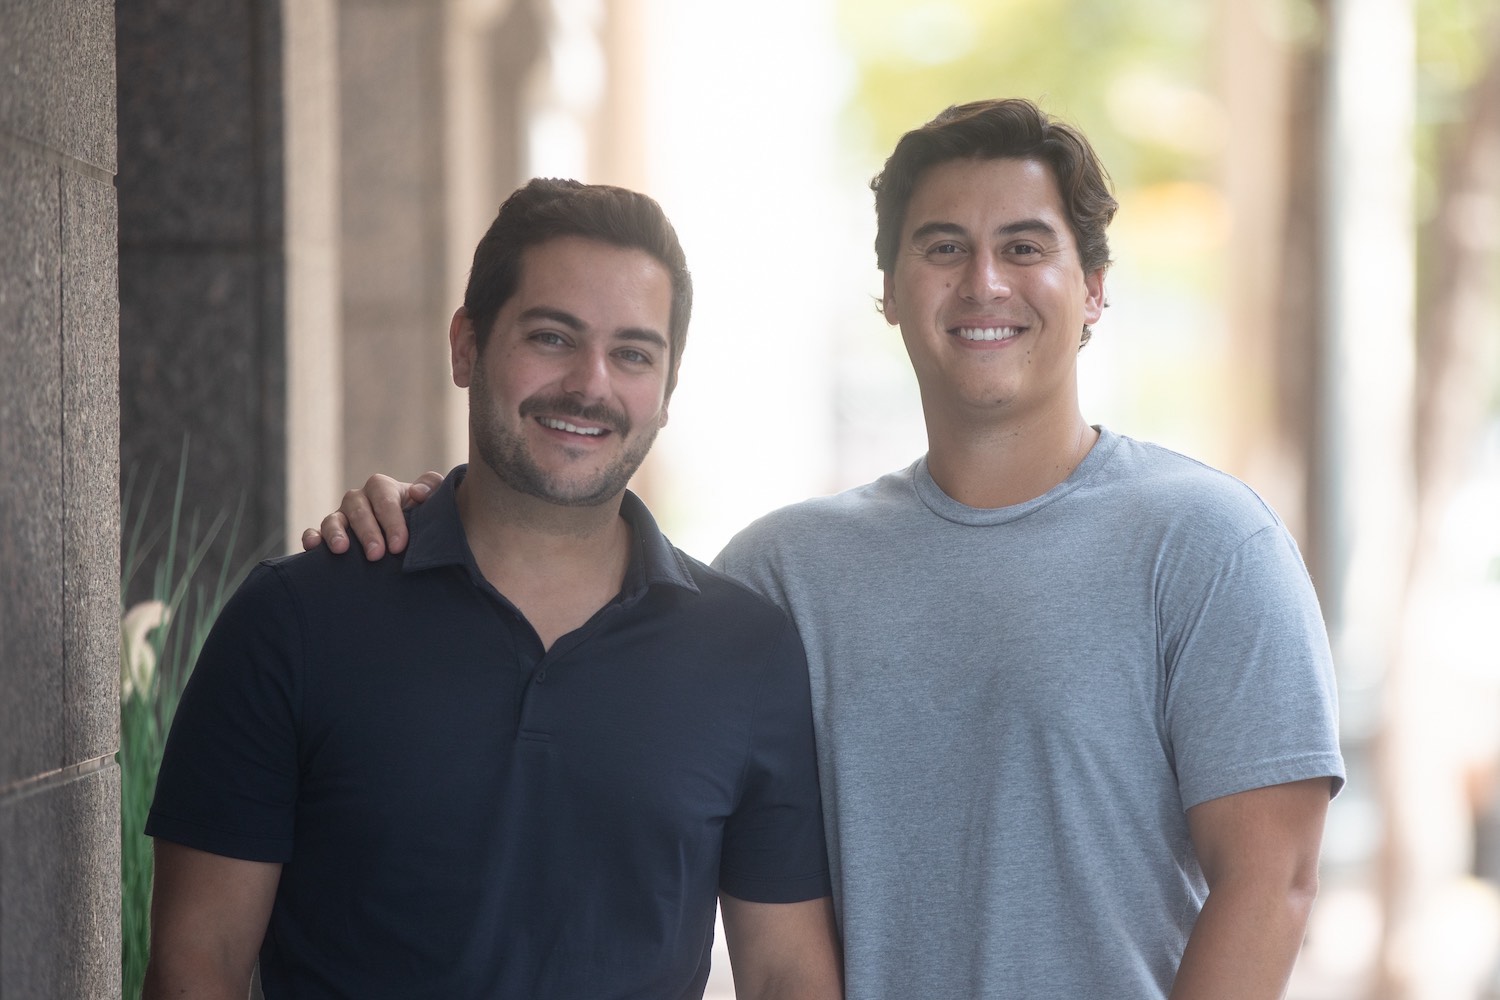 Relevize co-founders Michael Nardella and Peter Sidney smile outside a building